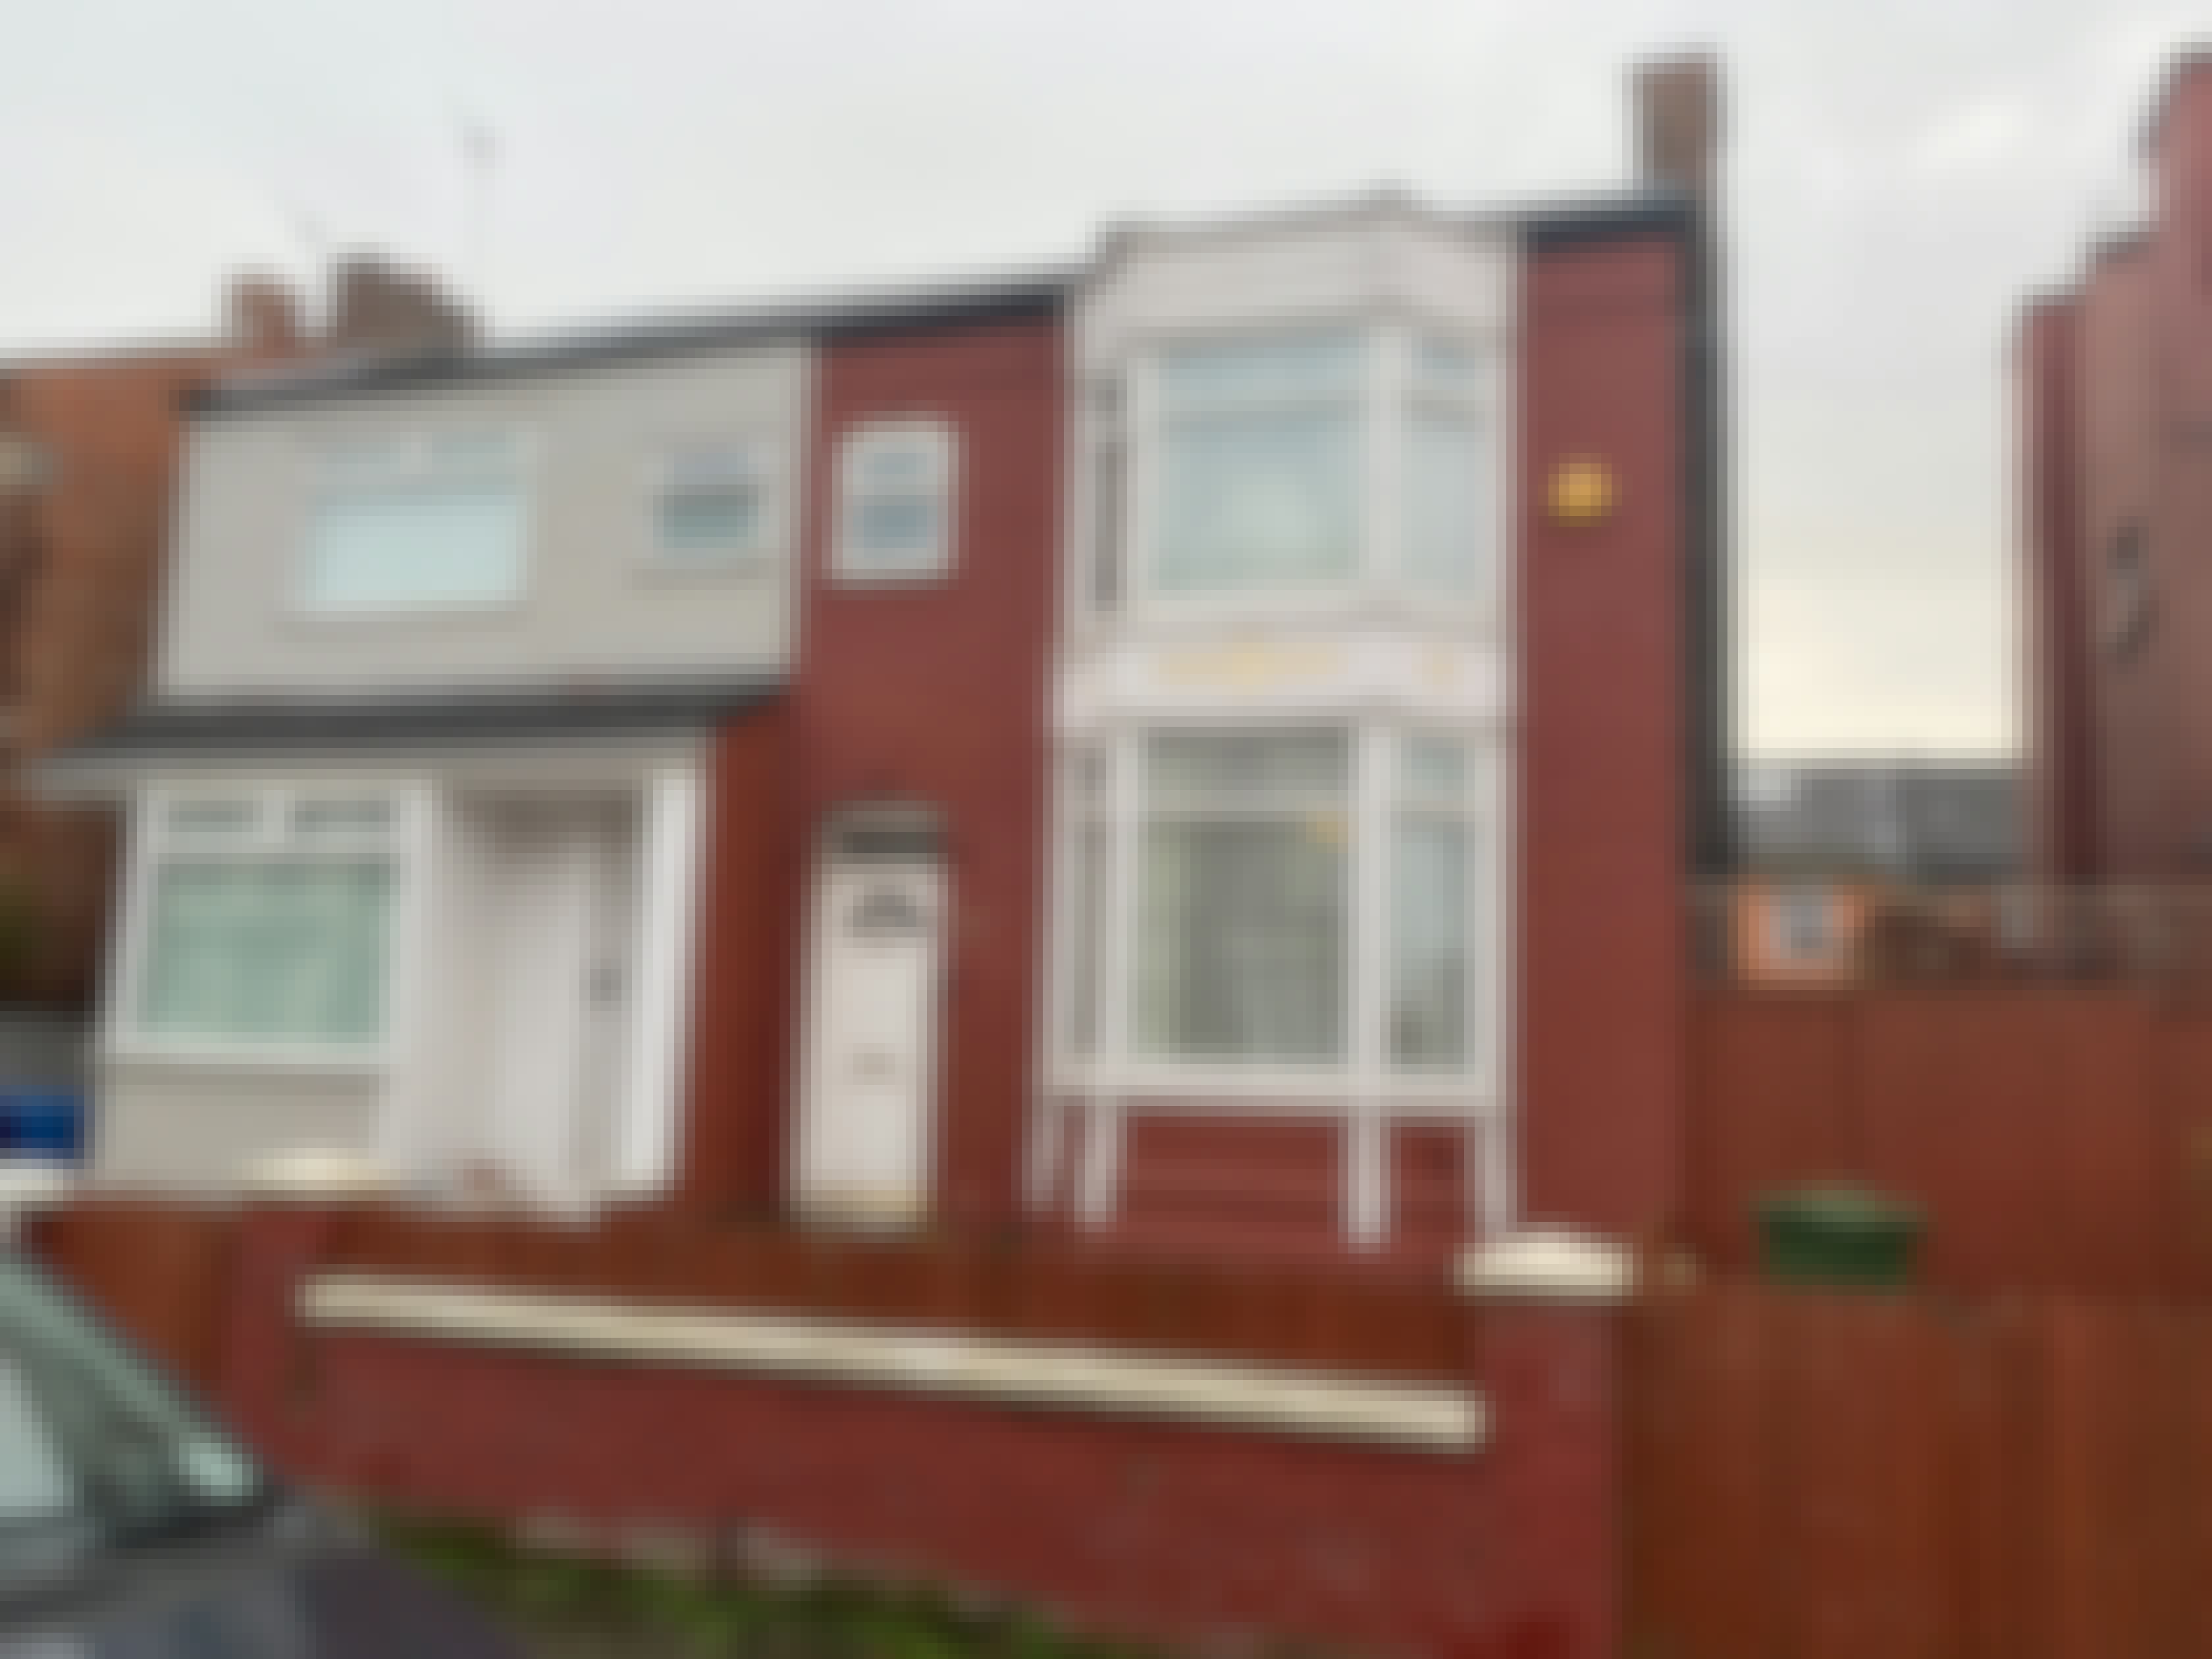 Overview image #1 for Chester Road, Tuebrook, Liverpool, L6